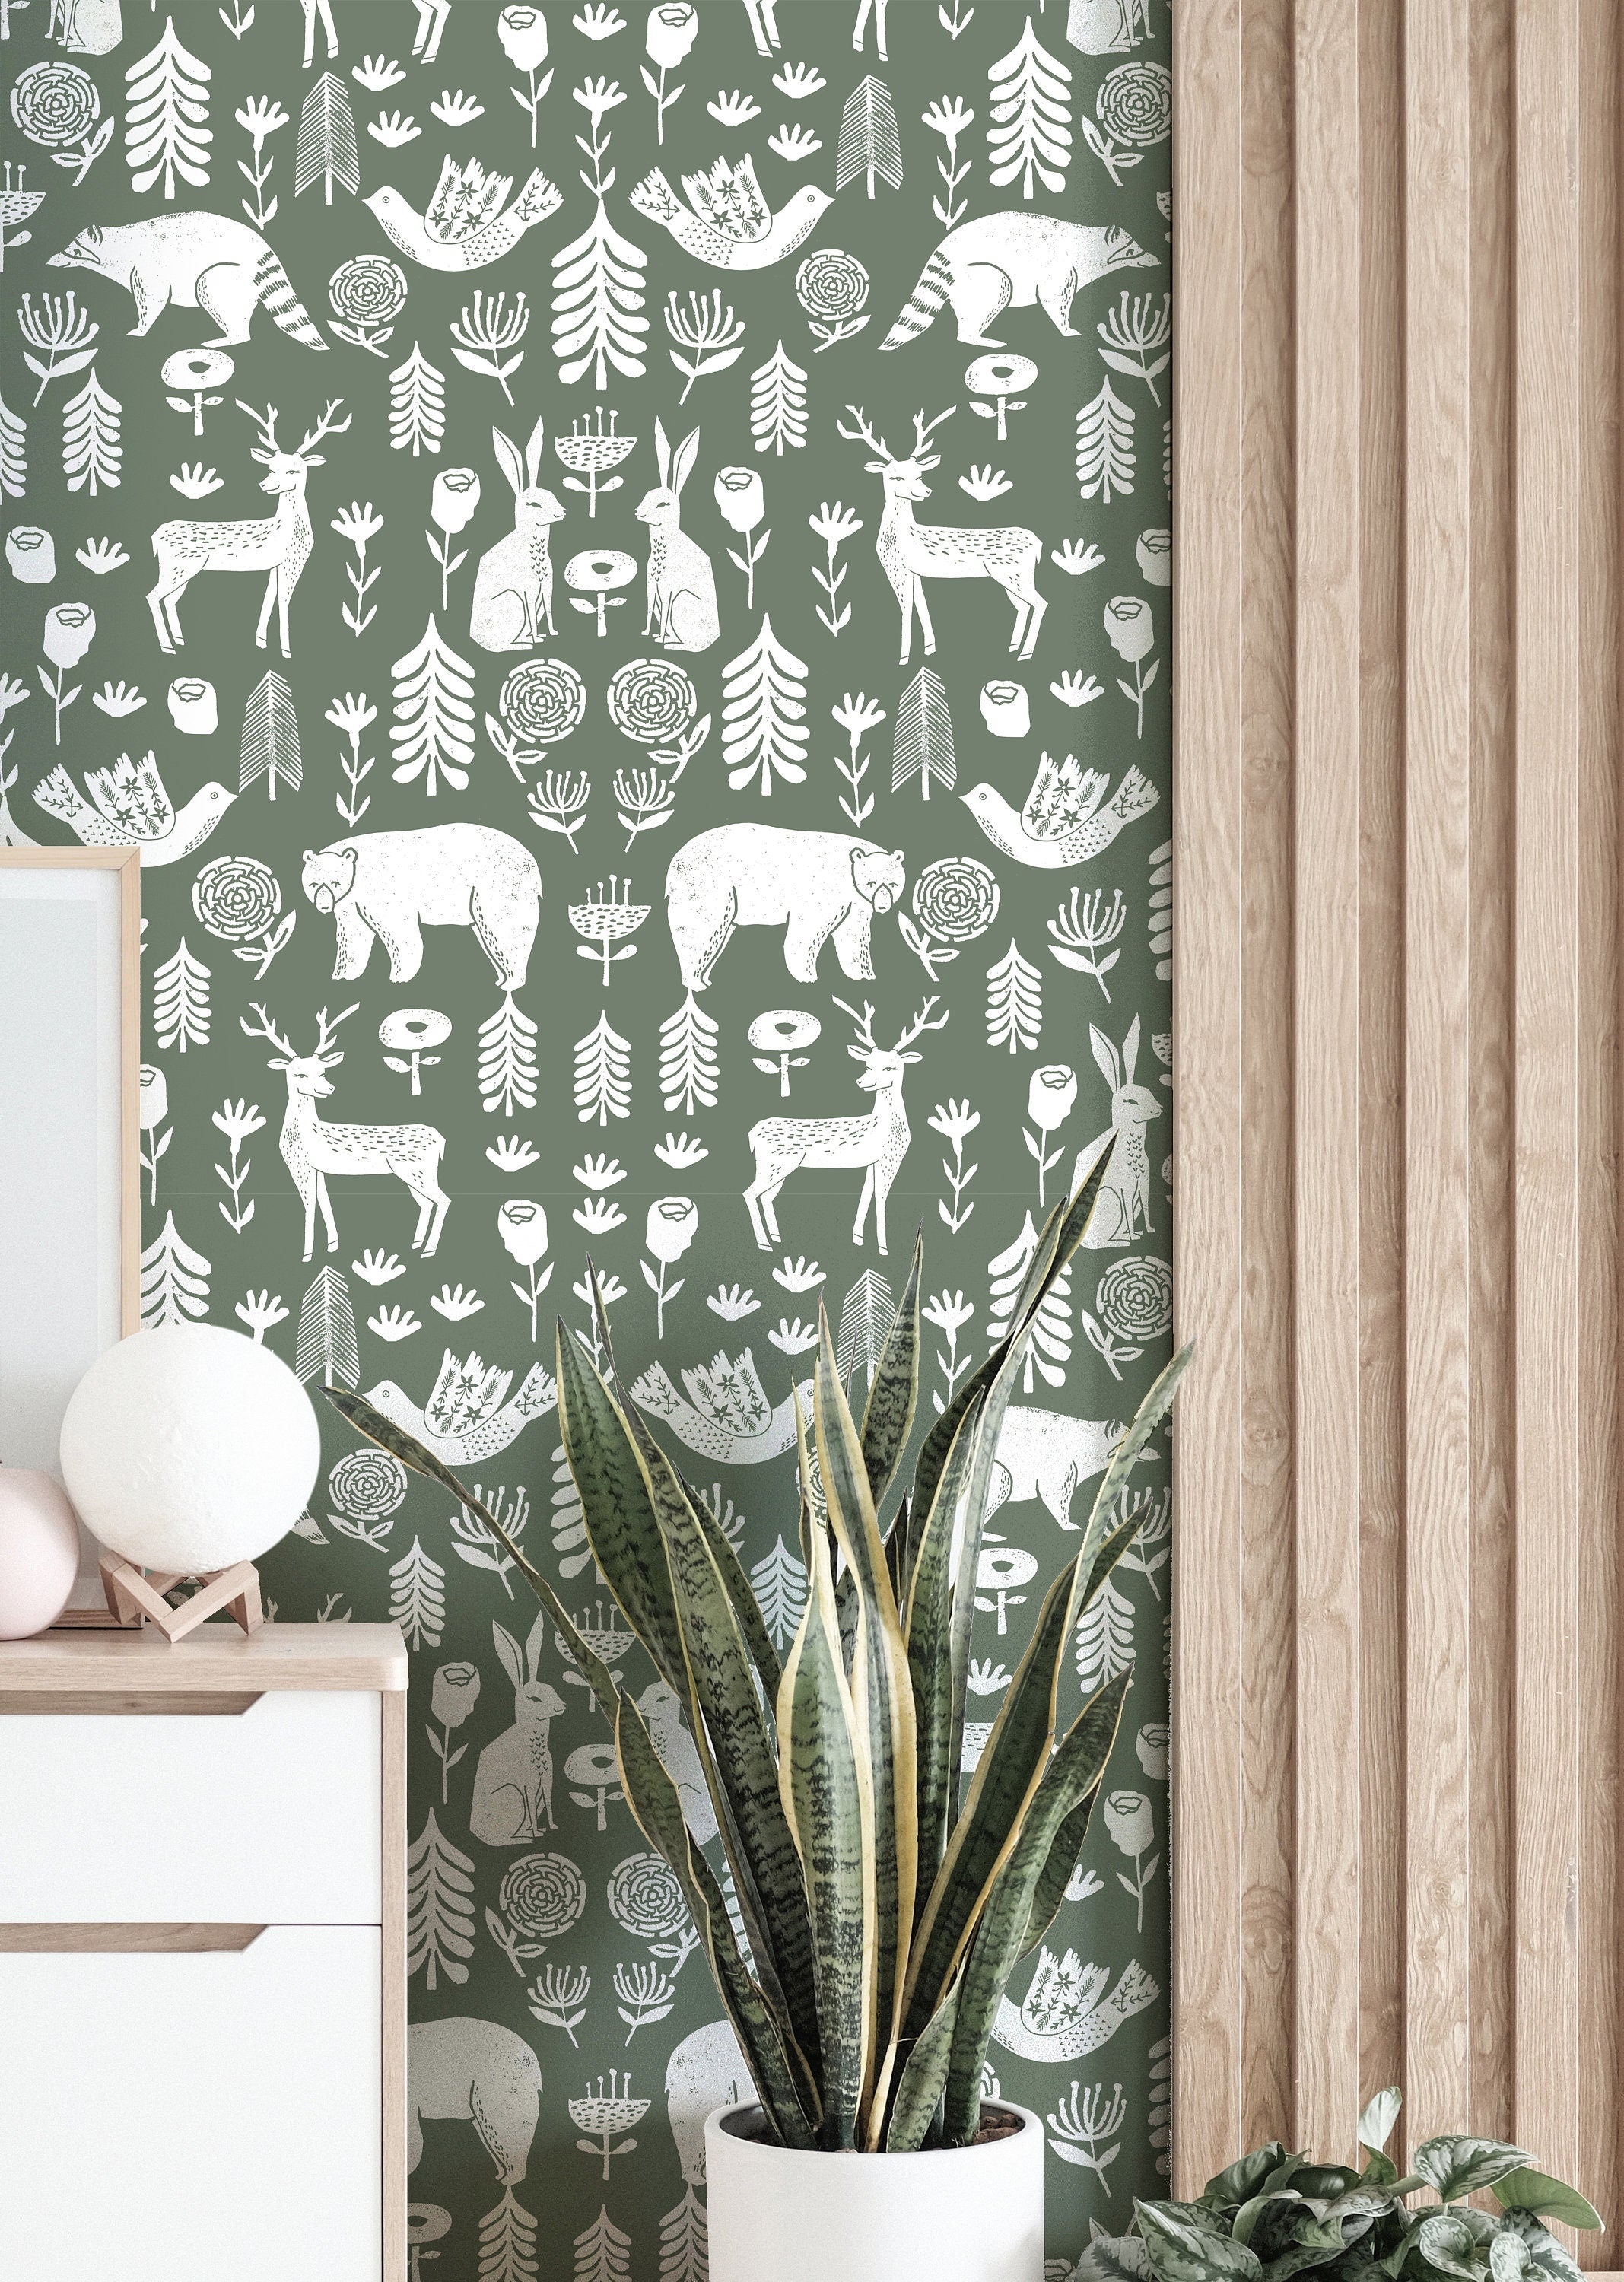 Wallpaper Peel and Stick Wallpaper Stampled Green White Colonial Animals Removable Wallpaper Wall Decor Home Decor Wall Art Room Decor 3764 - JamesAndColors